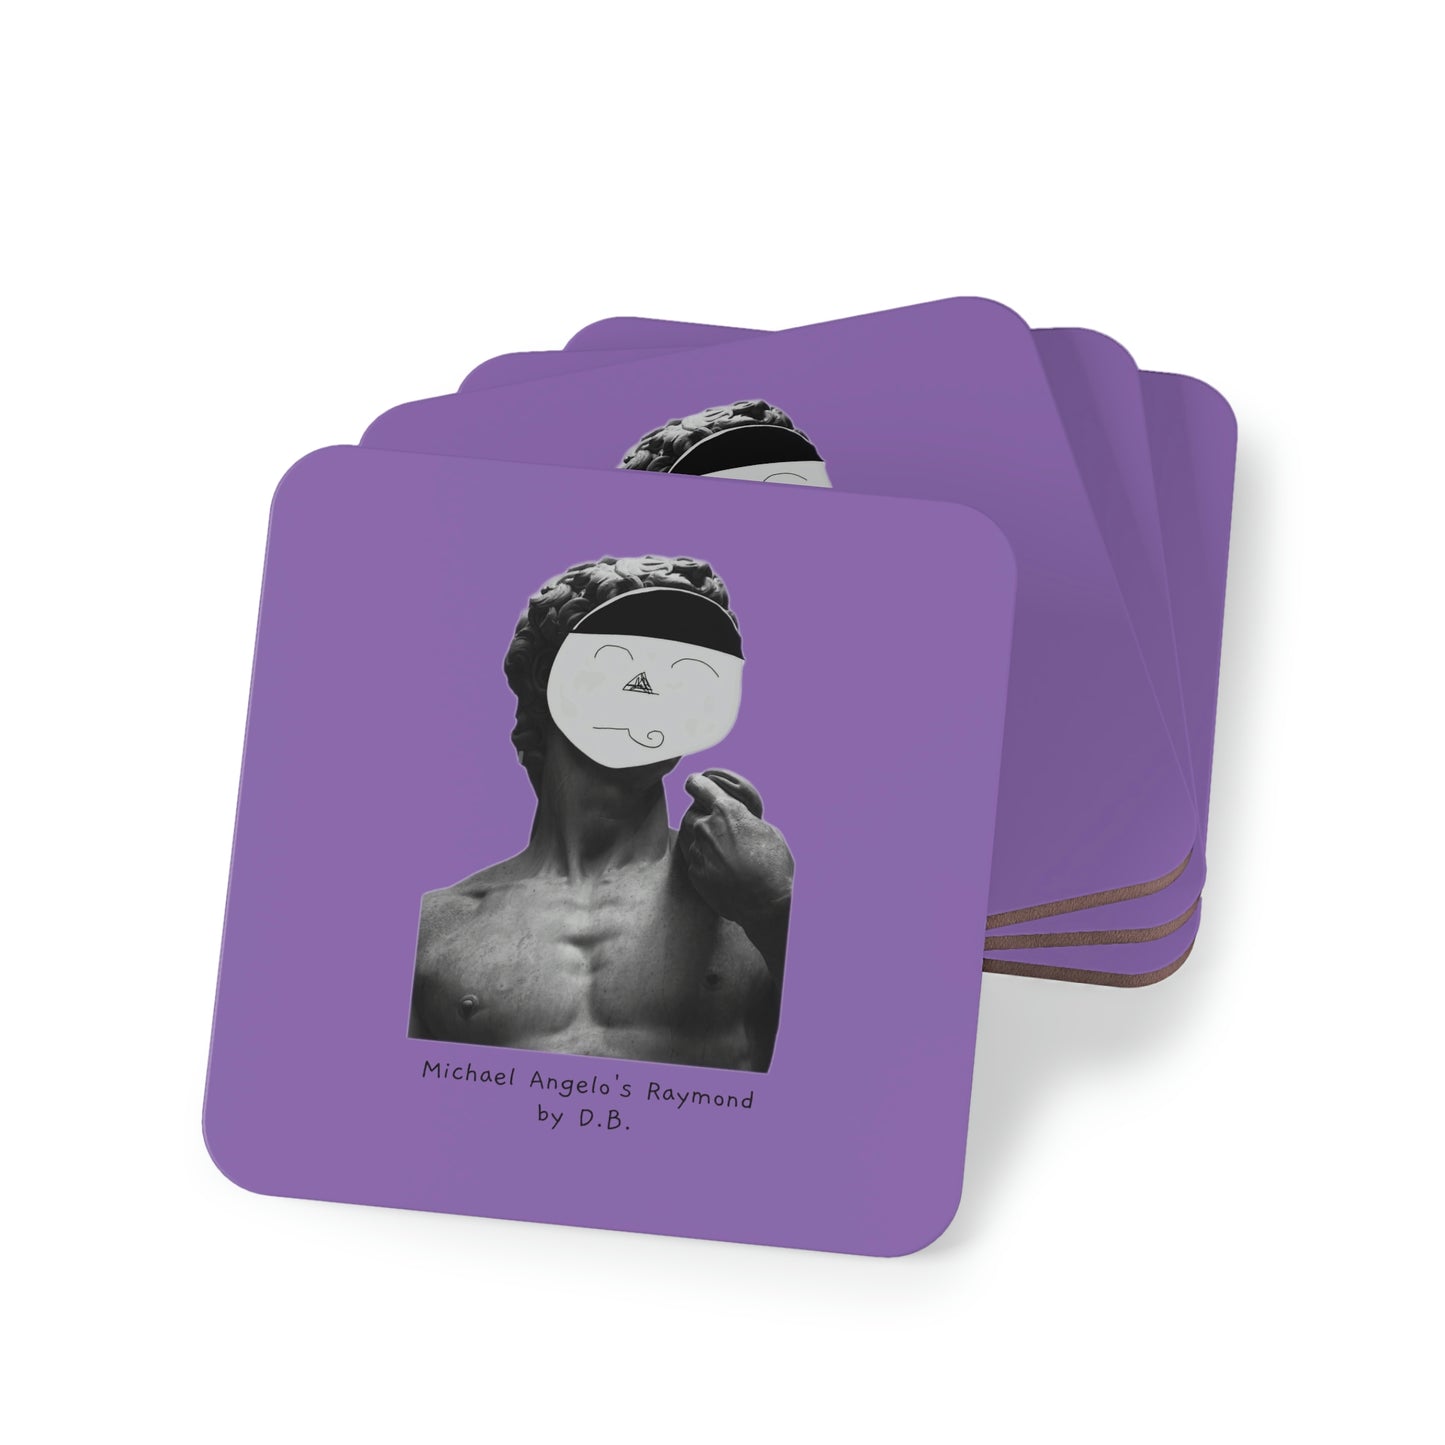 Stylish Drink Coasters with Michael Angelo's Raymond print by D.B.